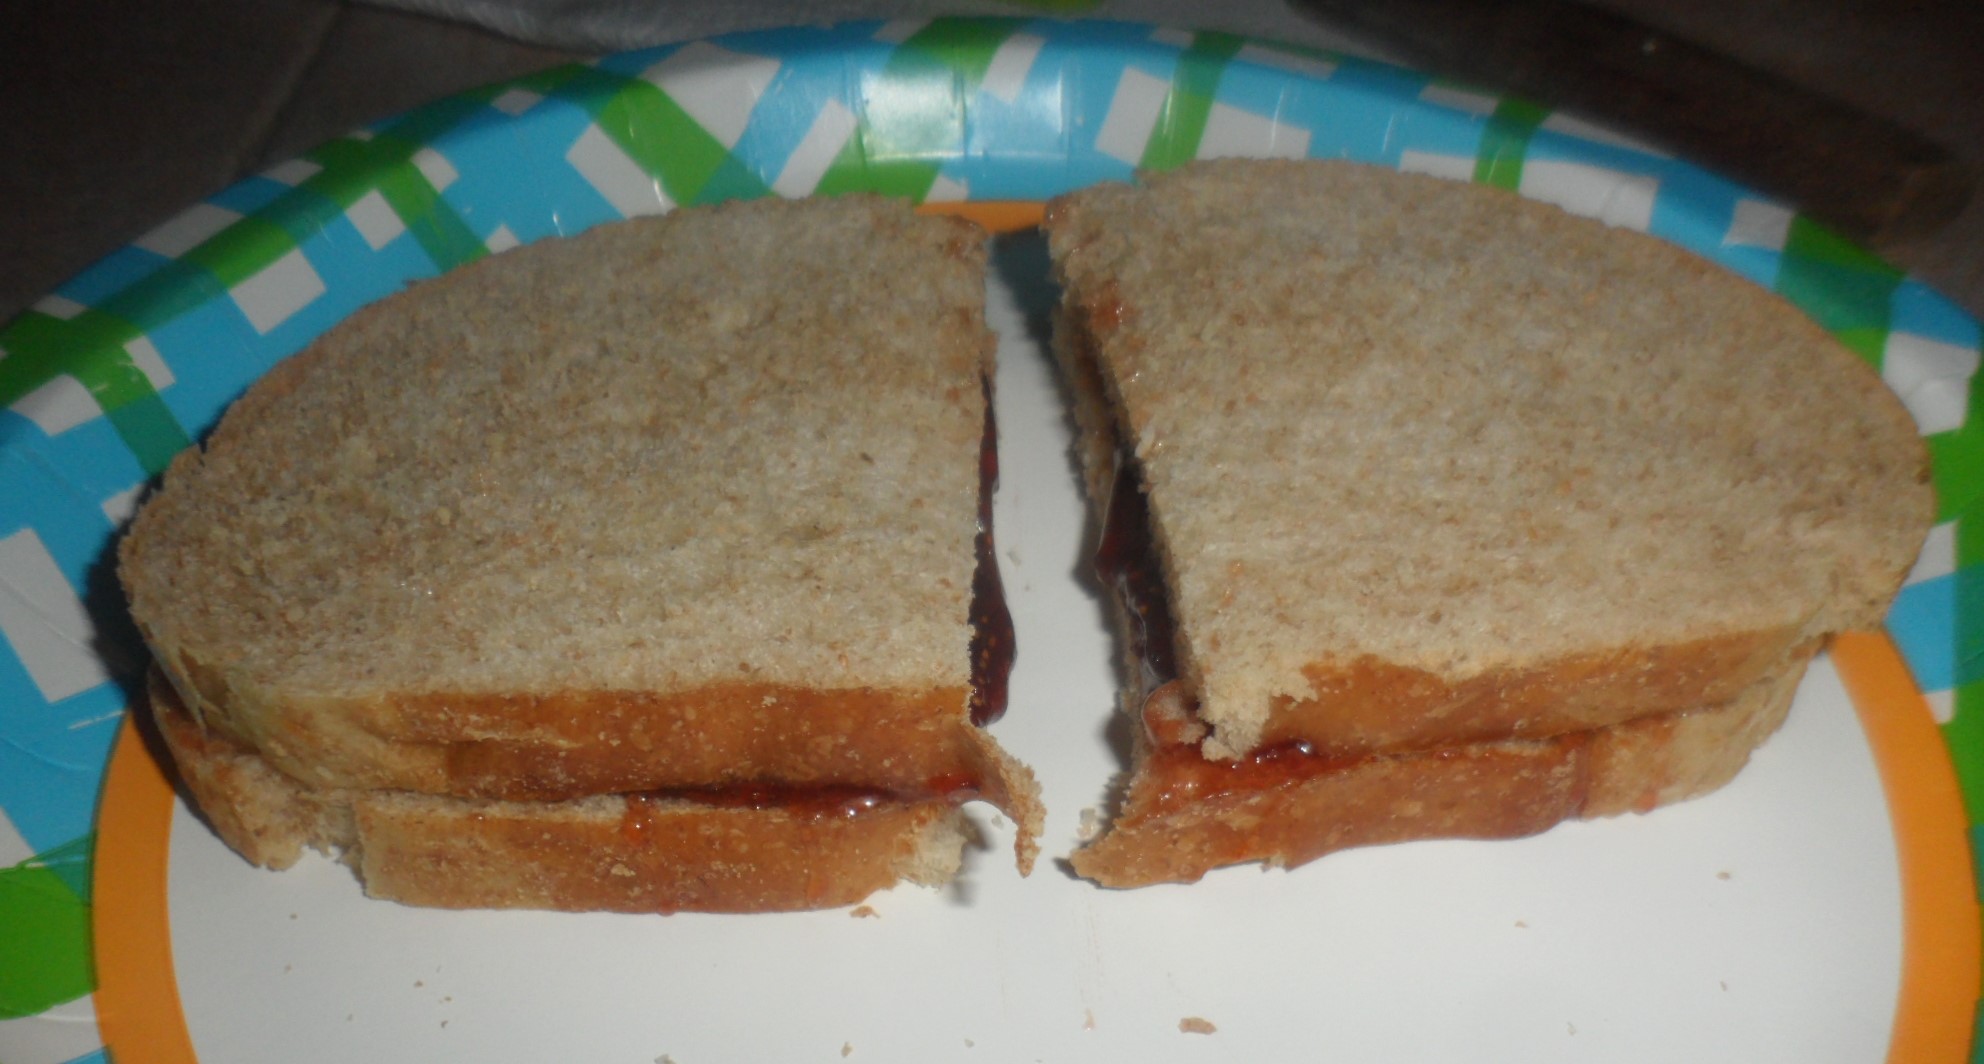 The completed not so giant strawberry jam sandwich.